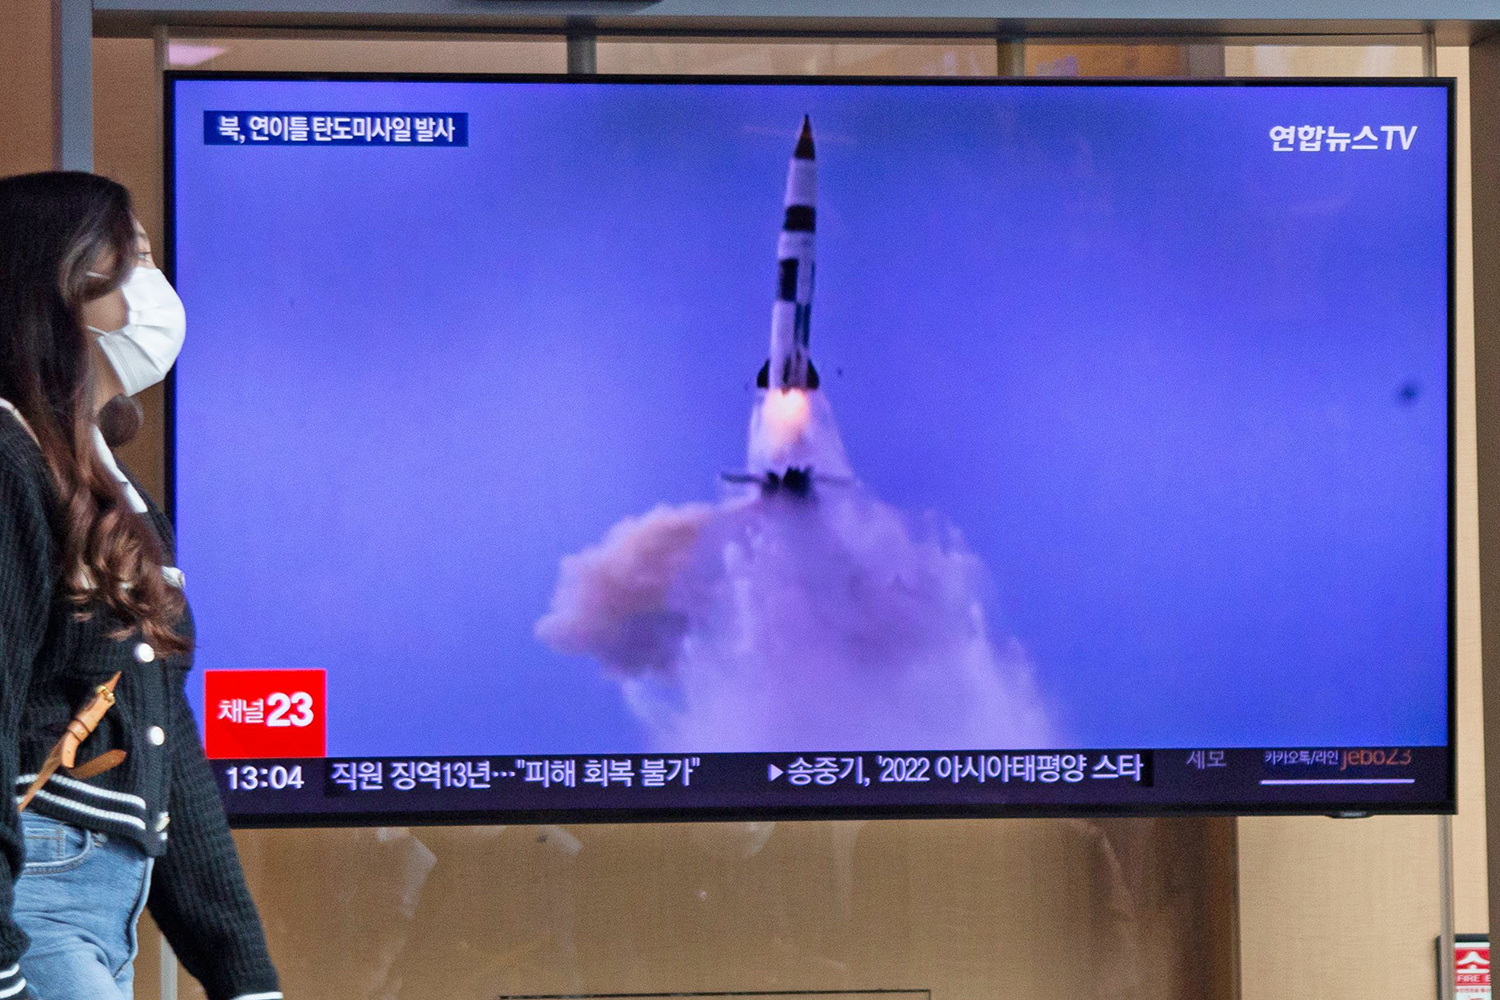 Mandatory Credit: Photo by JEON HEON-KYUN/EPA-EFE/Shutterstock (13430546a) A woman watches the news about a North Korea ballistic missile launch, at a station in Seoul, South Korea, 30 September 2022. According to South Korea's Joint Chiefs of Staff (JCS), Pyongyang launched two more ballistic missiles towards the East Sea on the evening of 29 September, hours after the US vice president met with South Korea's head of state in Seoul. Two more missiles were also tested on 28 September. North Korea carries out back-to-back ballistic missile tests, Seoul - 30 Sep 2022